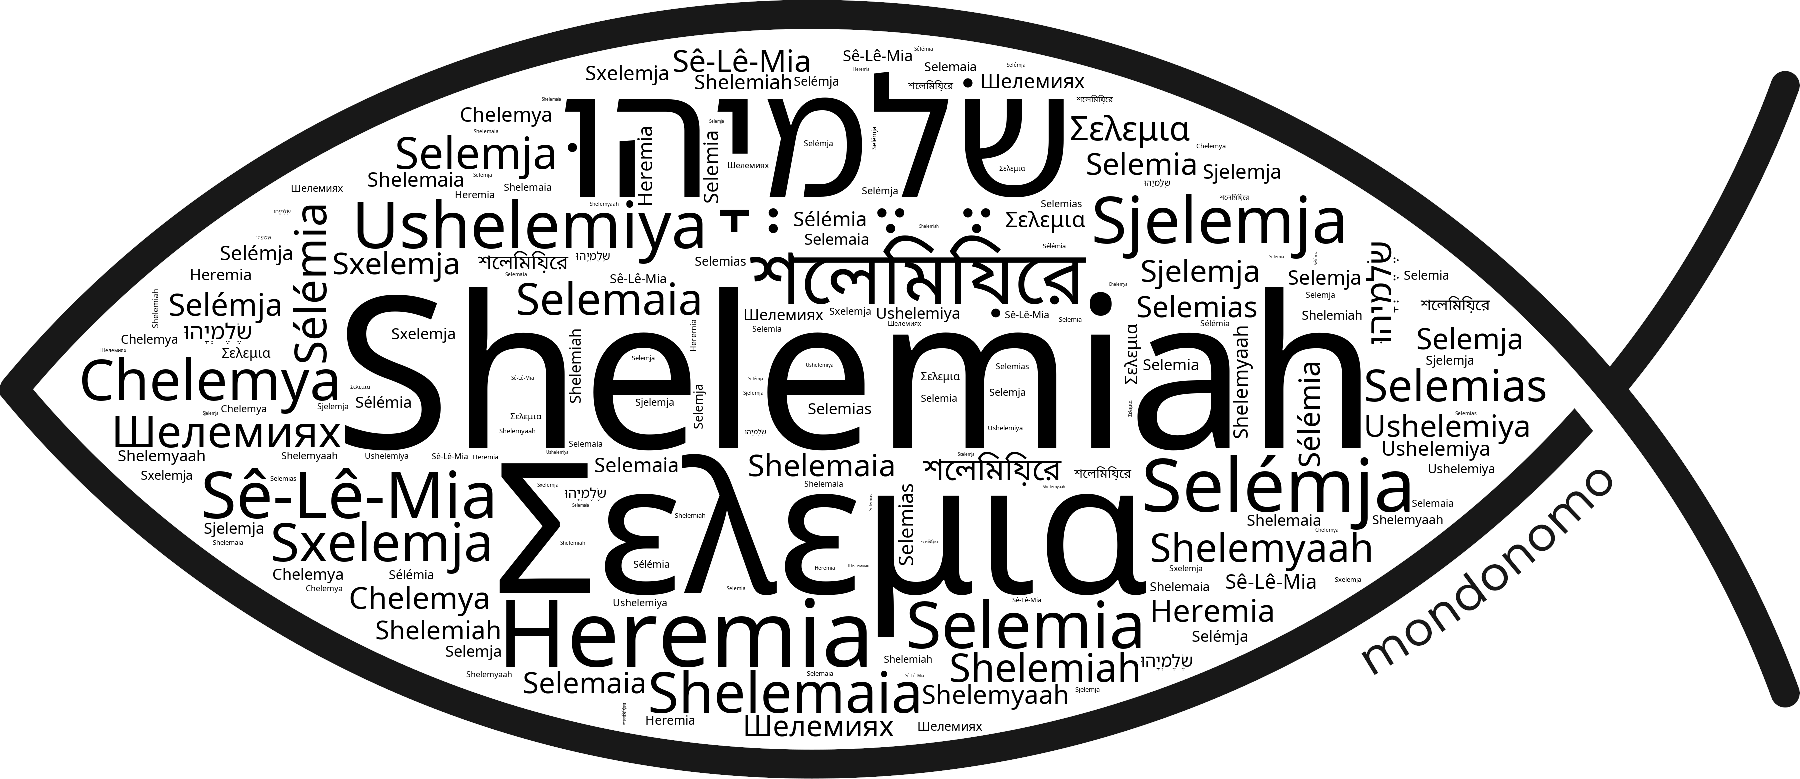 Name Shelemiah in the world's Bibles